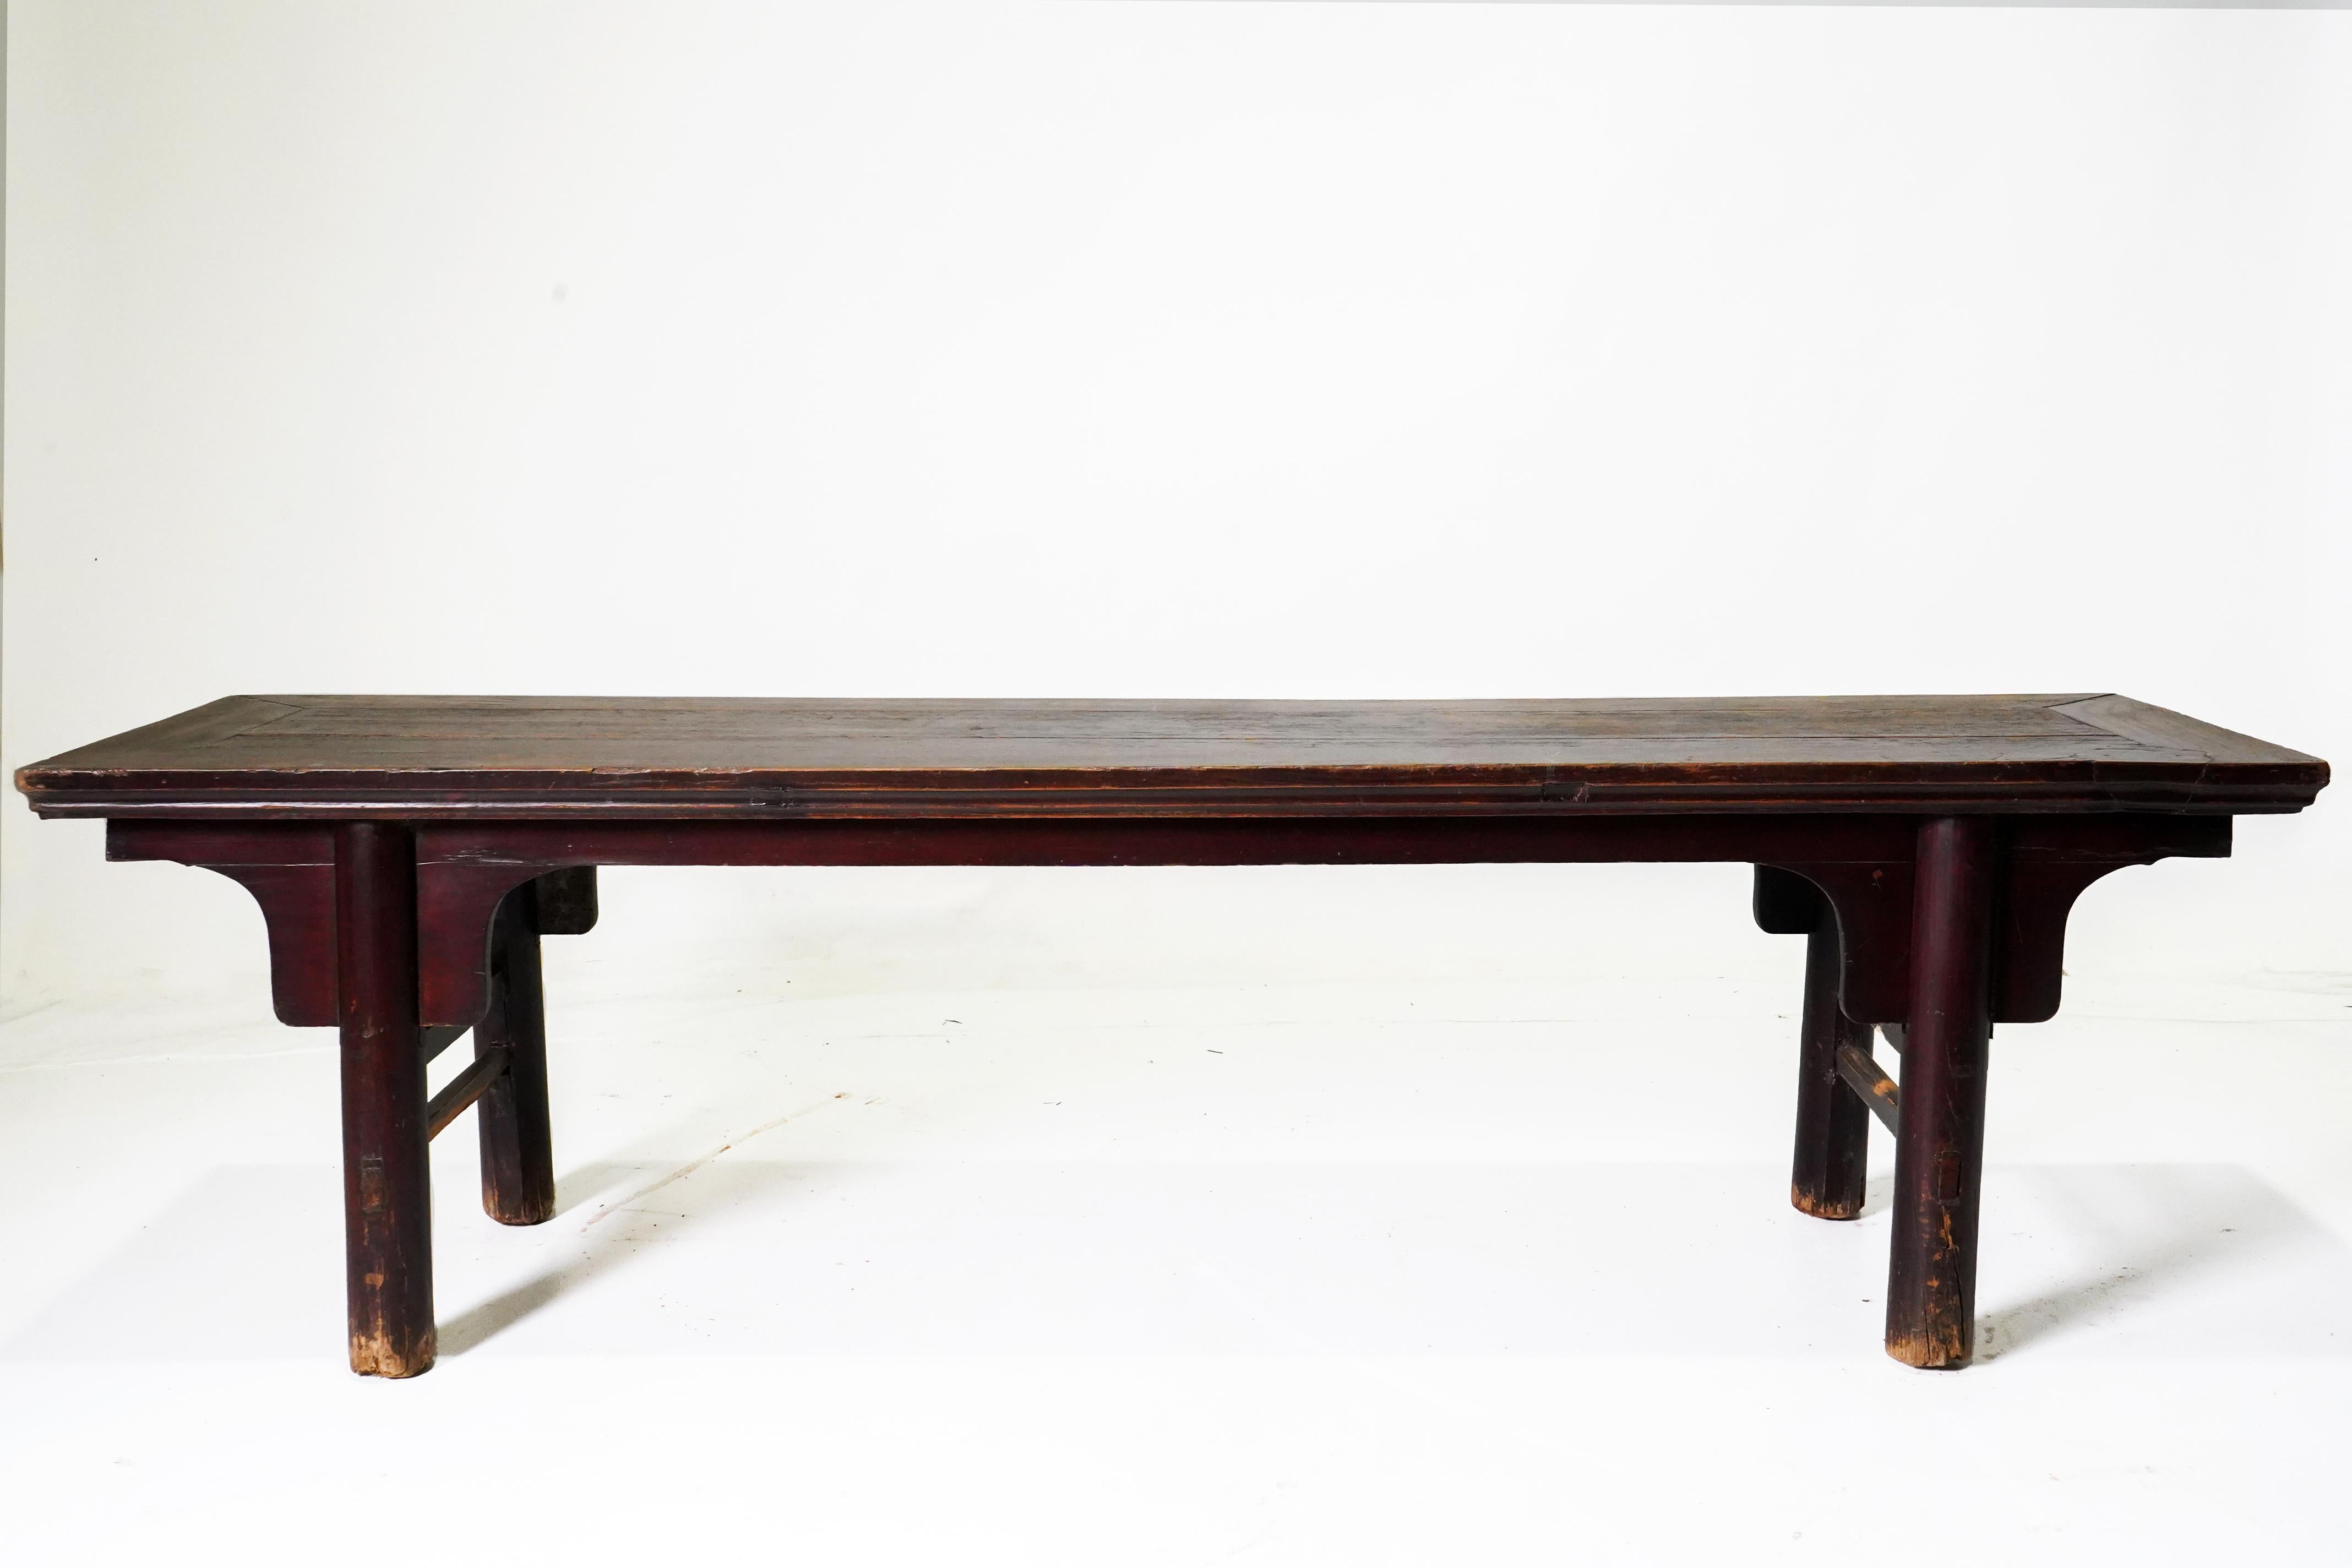 This long and graceful Chinese bench dates to the late 19th century and was made from northern elm using mortise-and-tenon joinery. It has a framed seat with a floating panel interior and is raised on splayed round legs reinforced by simple curved